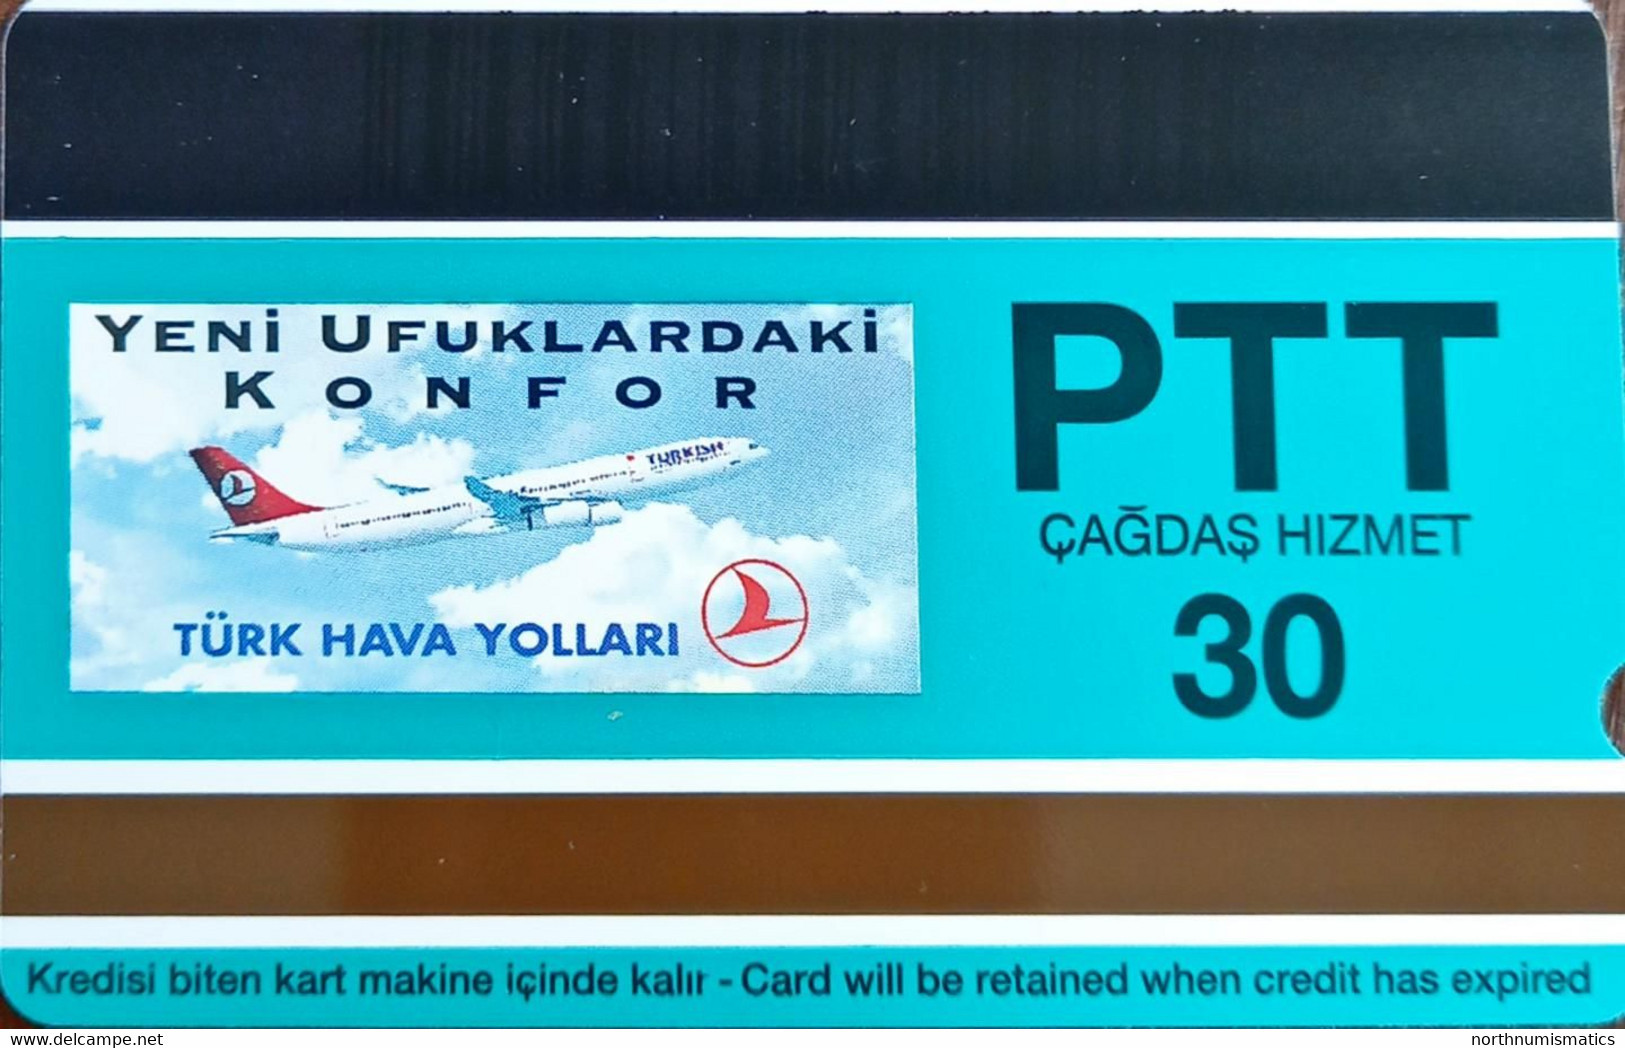 Turkey Phonecards THY Aircafts Dragon Rapid PTT 30 Units Unc - Lots - Collections